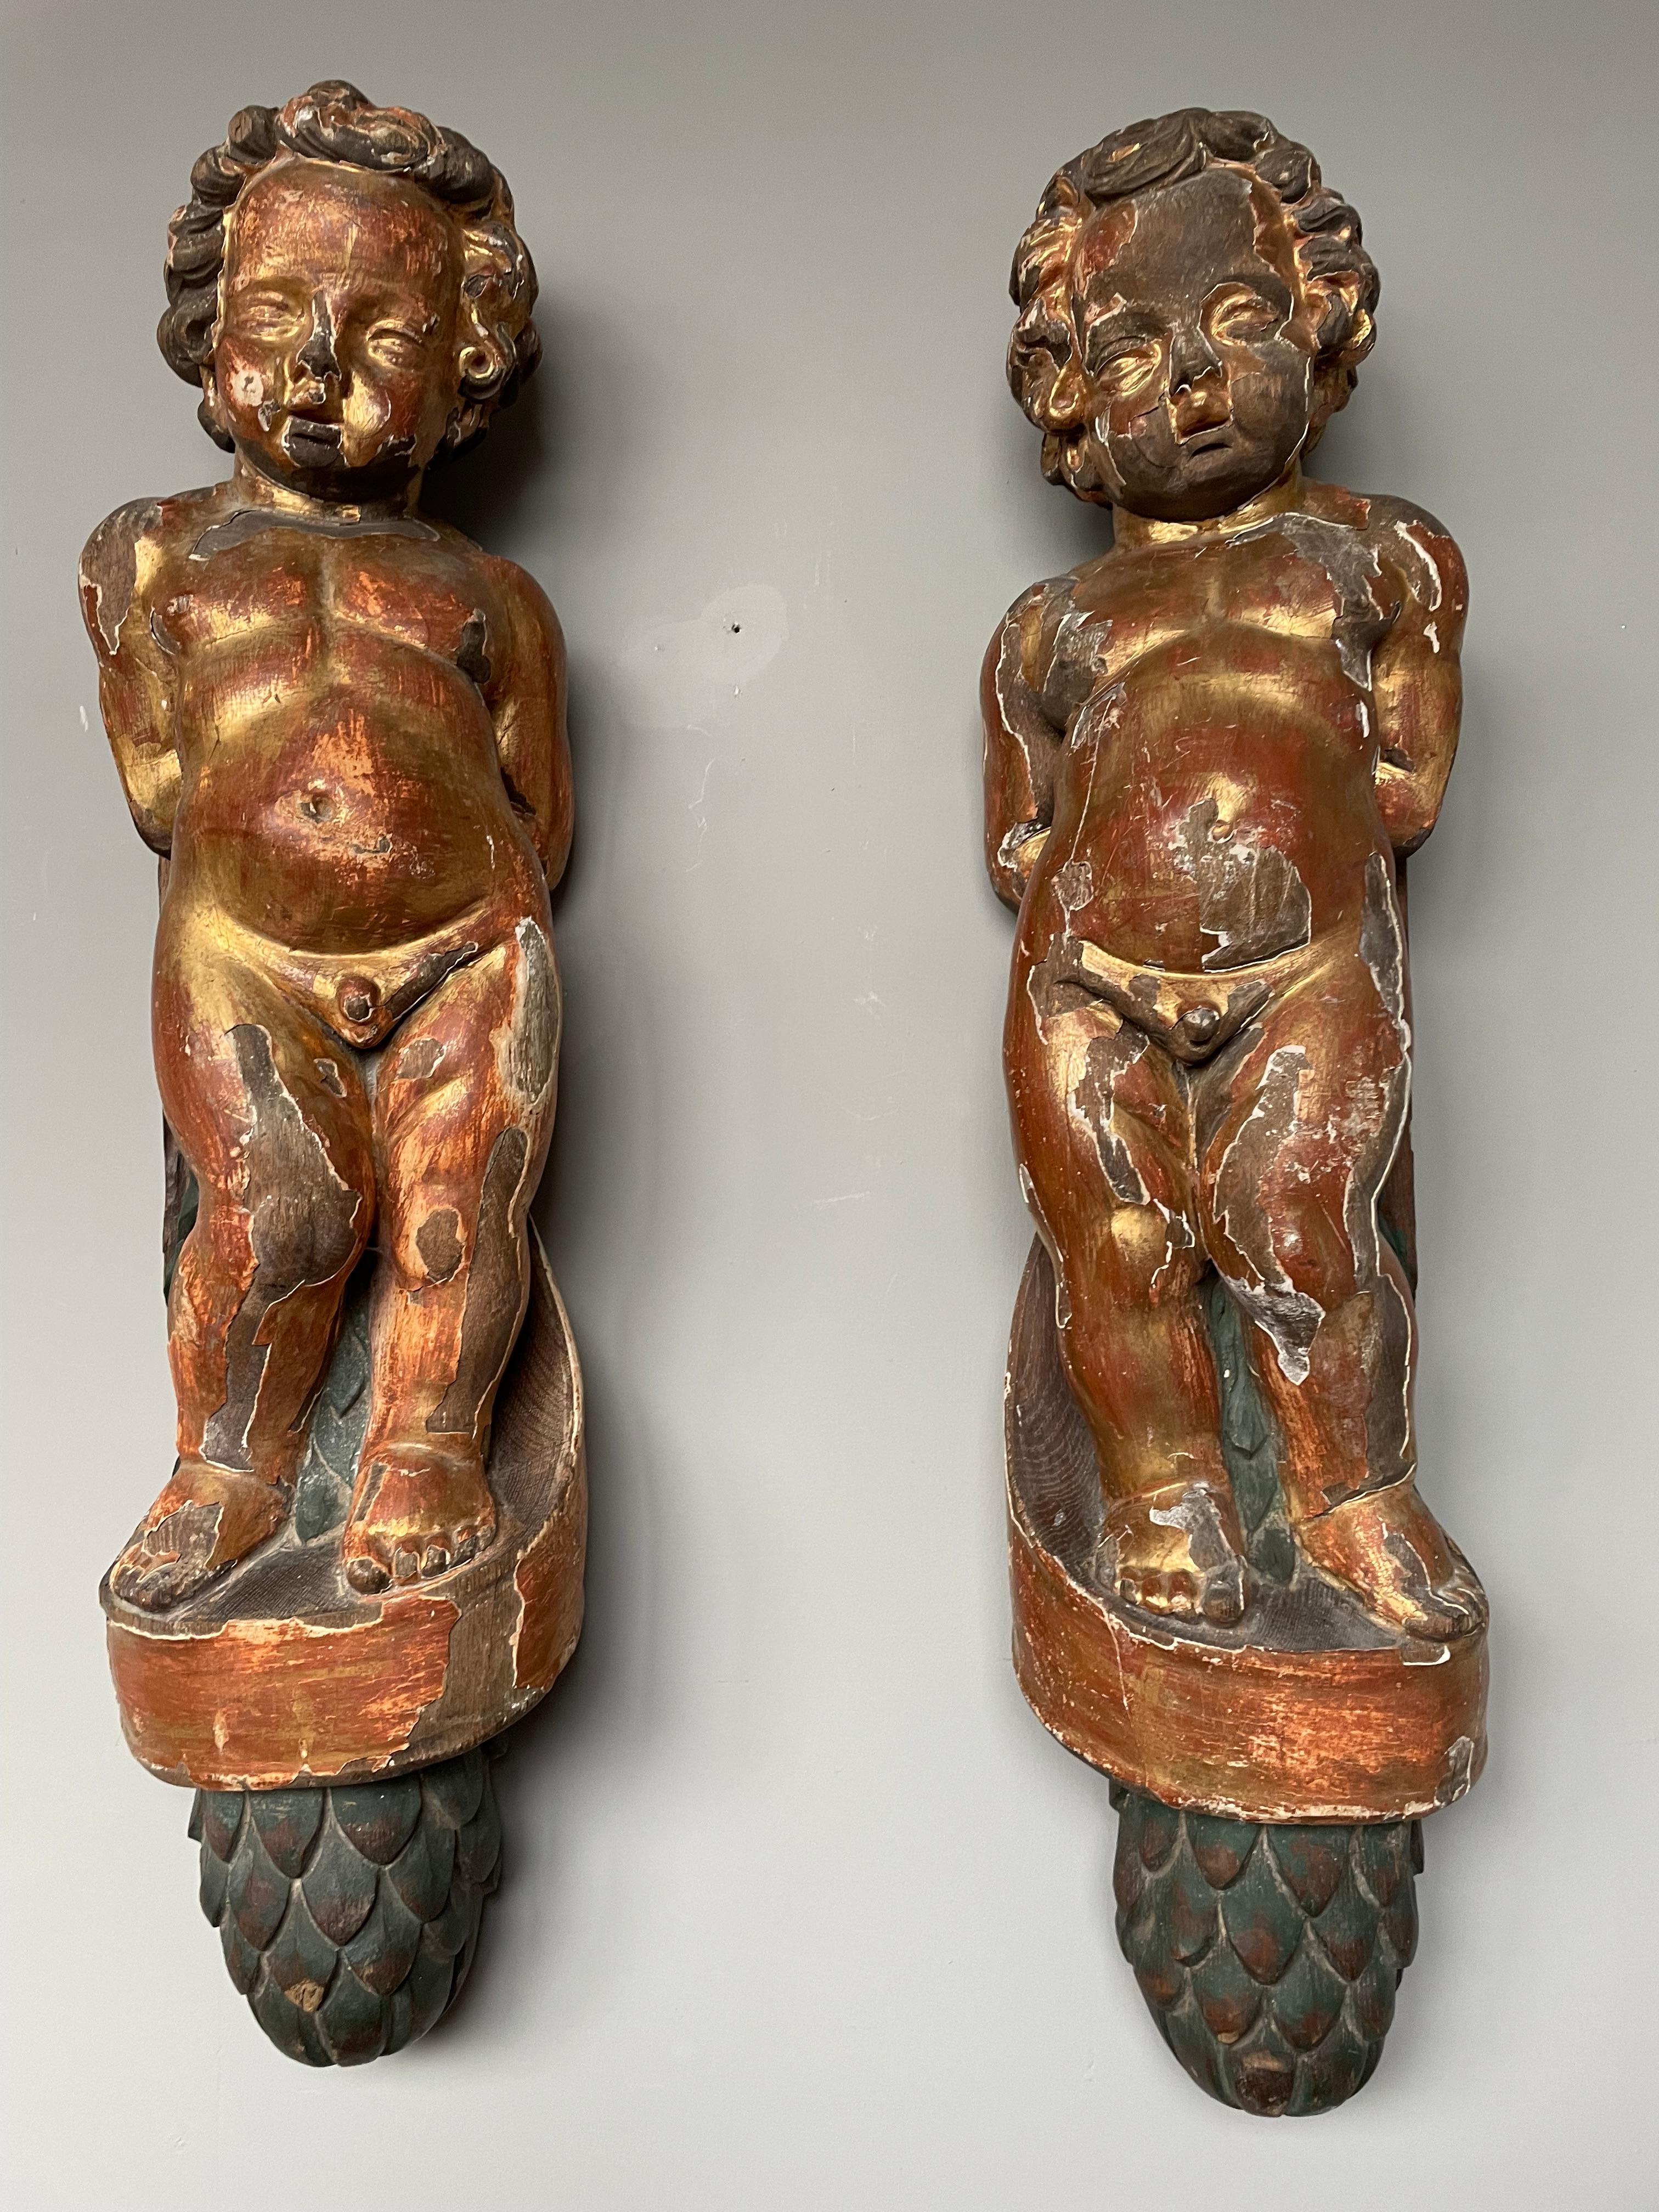 19th Century Baroque Revival Pair of 1800s Hand Carved & Gilt Solid Oak Wall Cherubs / Putti For Sale